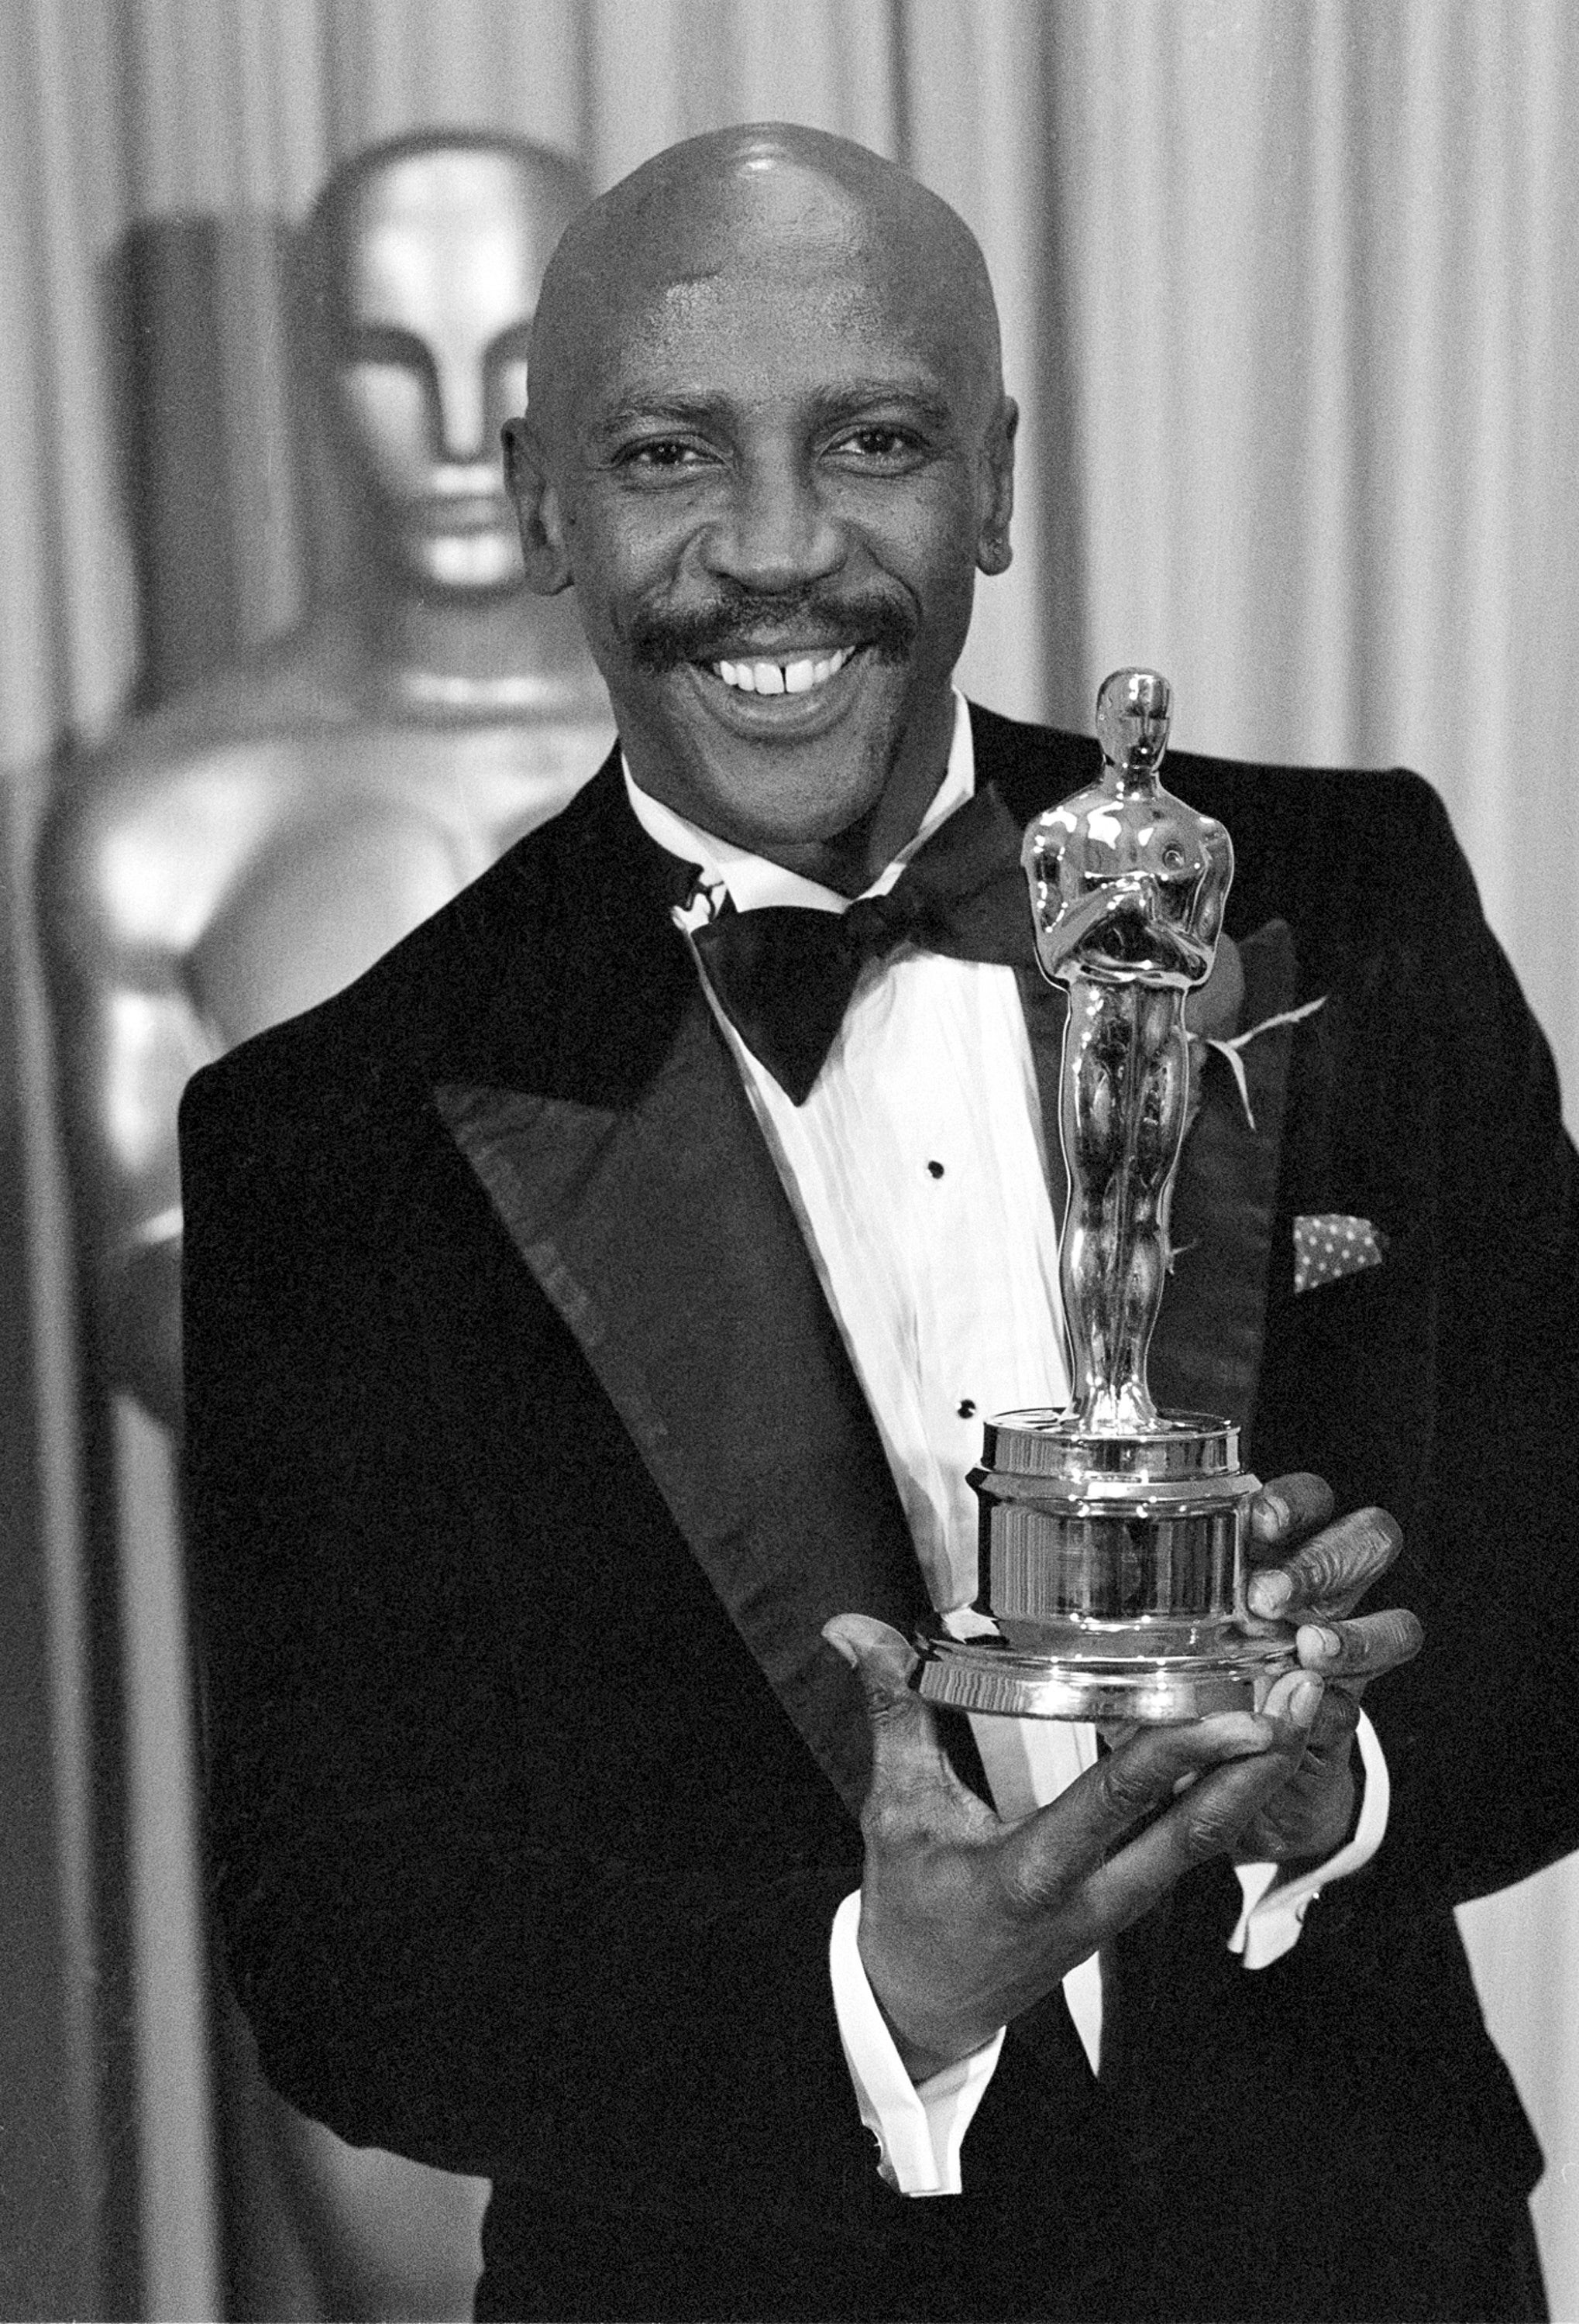 louis gossett jr, the first black man to win oscar for best supporting actor, dies aged 87